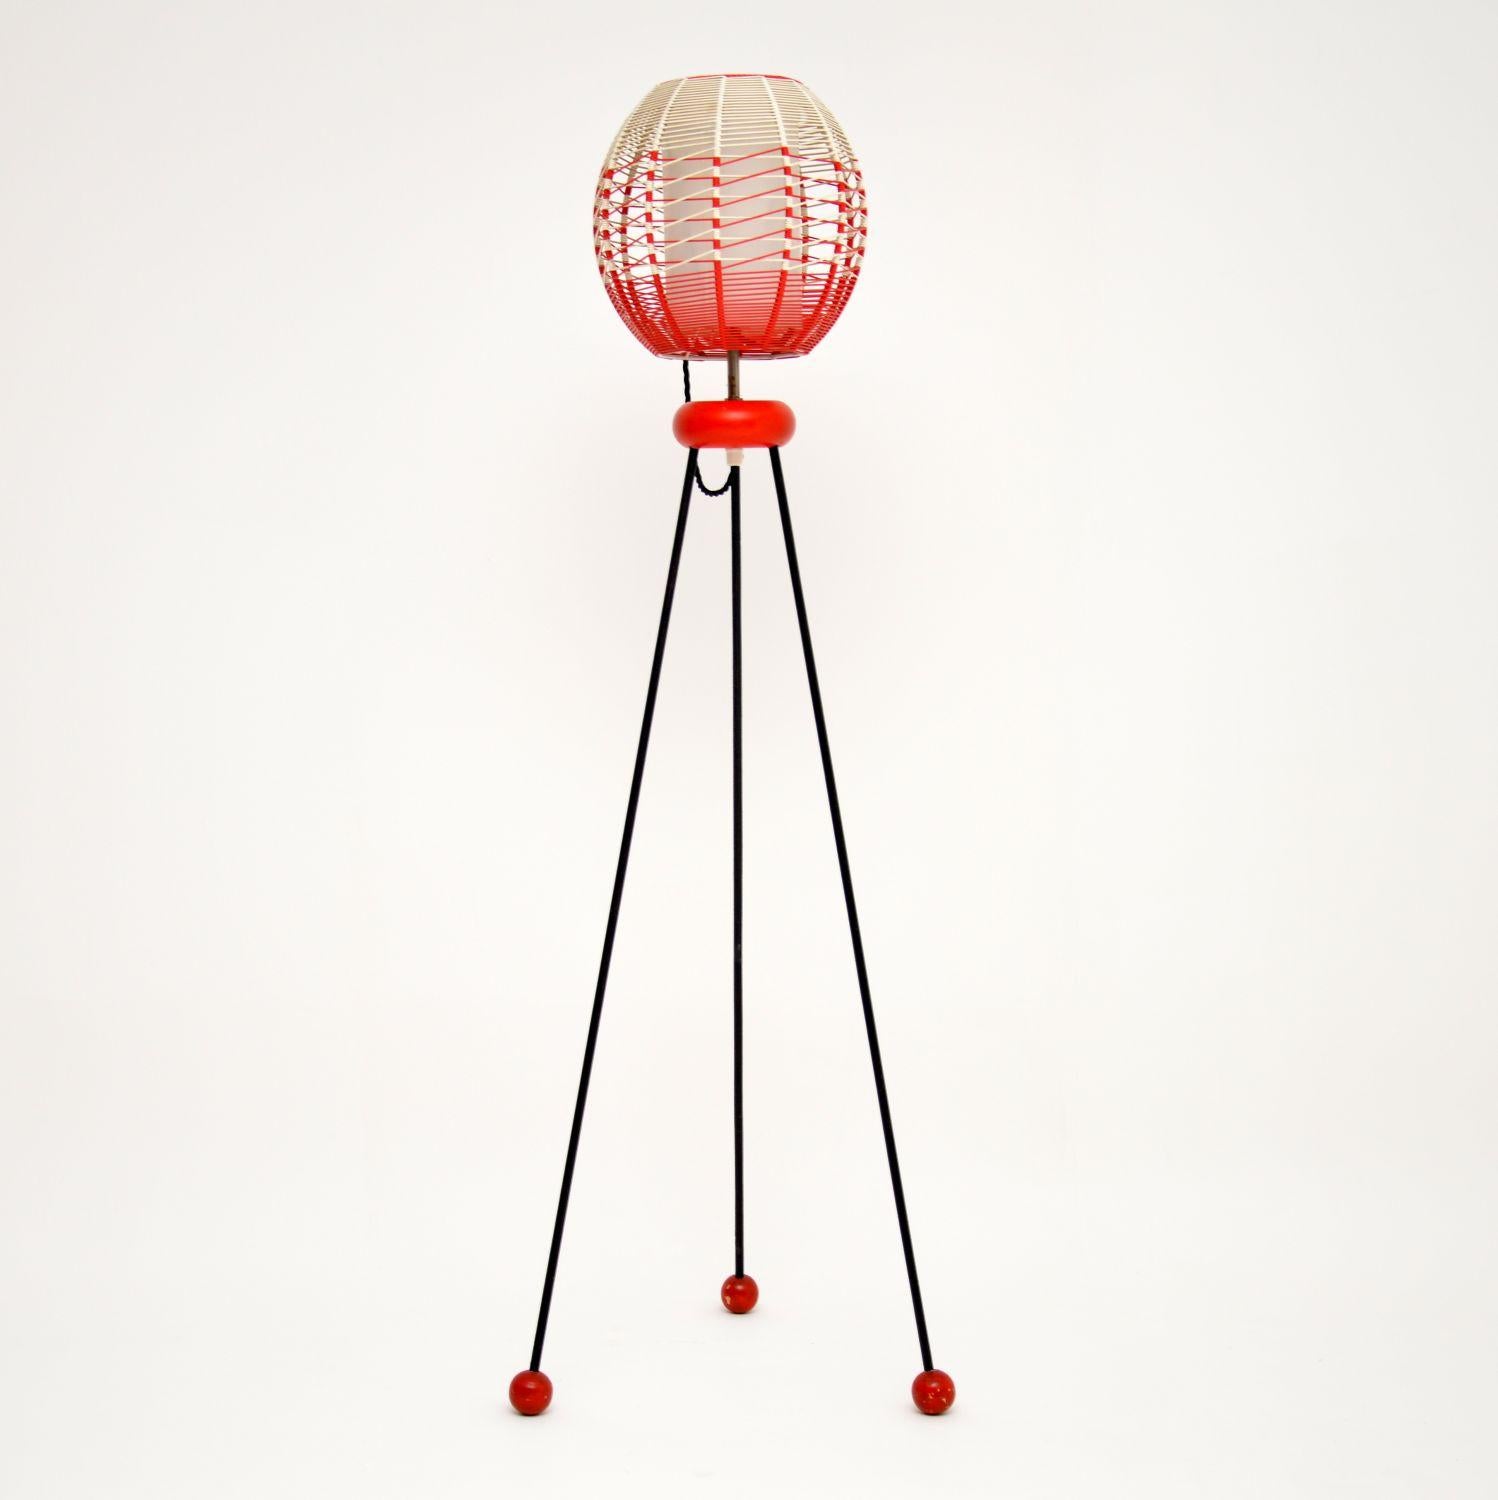 A stylish and unusual vintage floor lamp from the 1950s-1960s, this has an amazing atomic design. The shade is beautifully spun from colored plastic cord, the legs are steel and can be unscrewed easily from the wooden fixture. The condition is